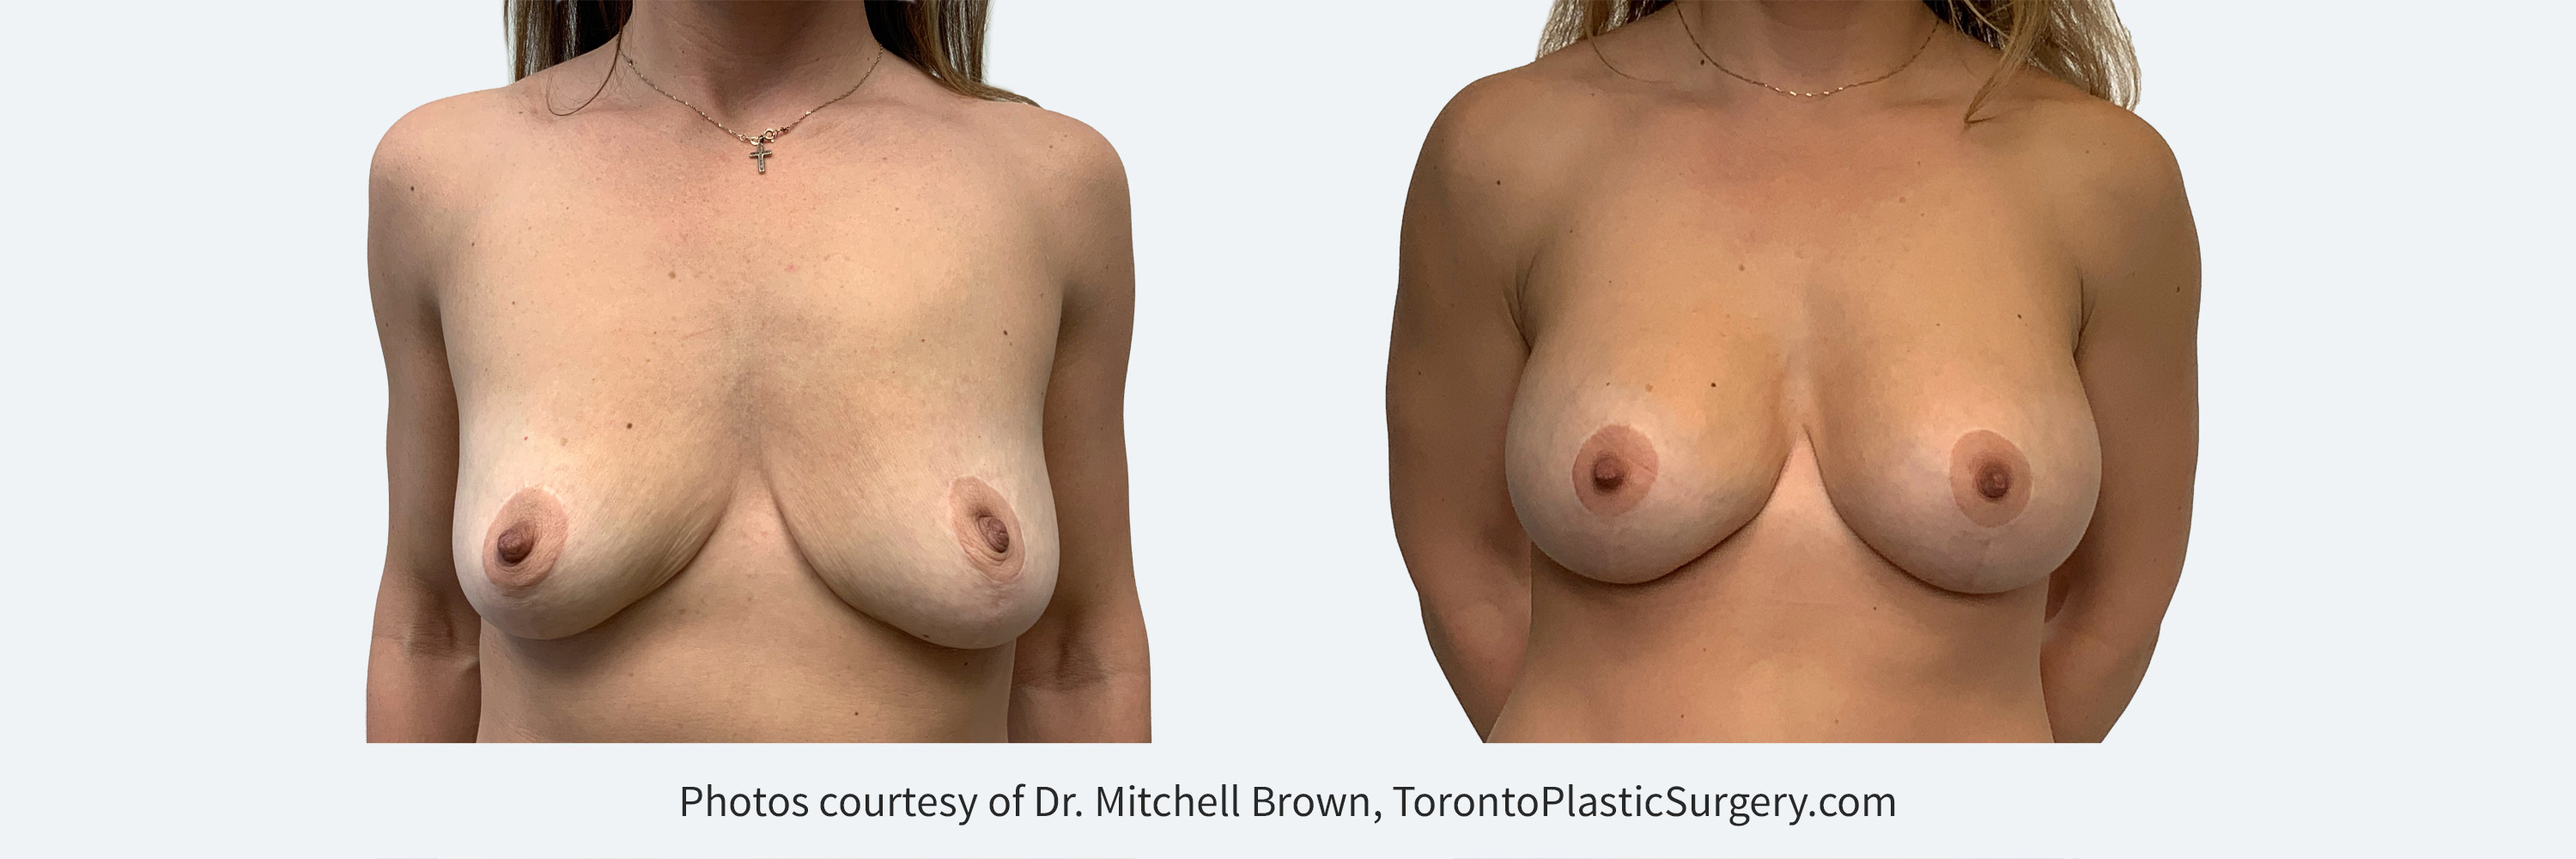 Previous breast reduction, lost weight and now desires implants. Before and 6 month after augmentation with 425cc implants.